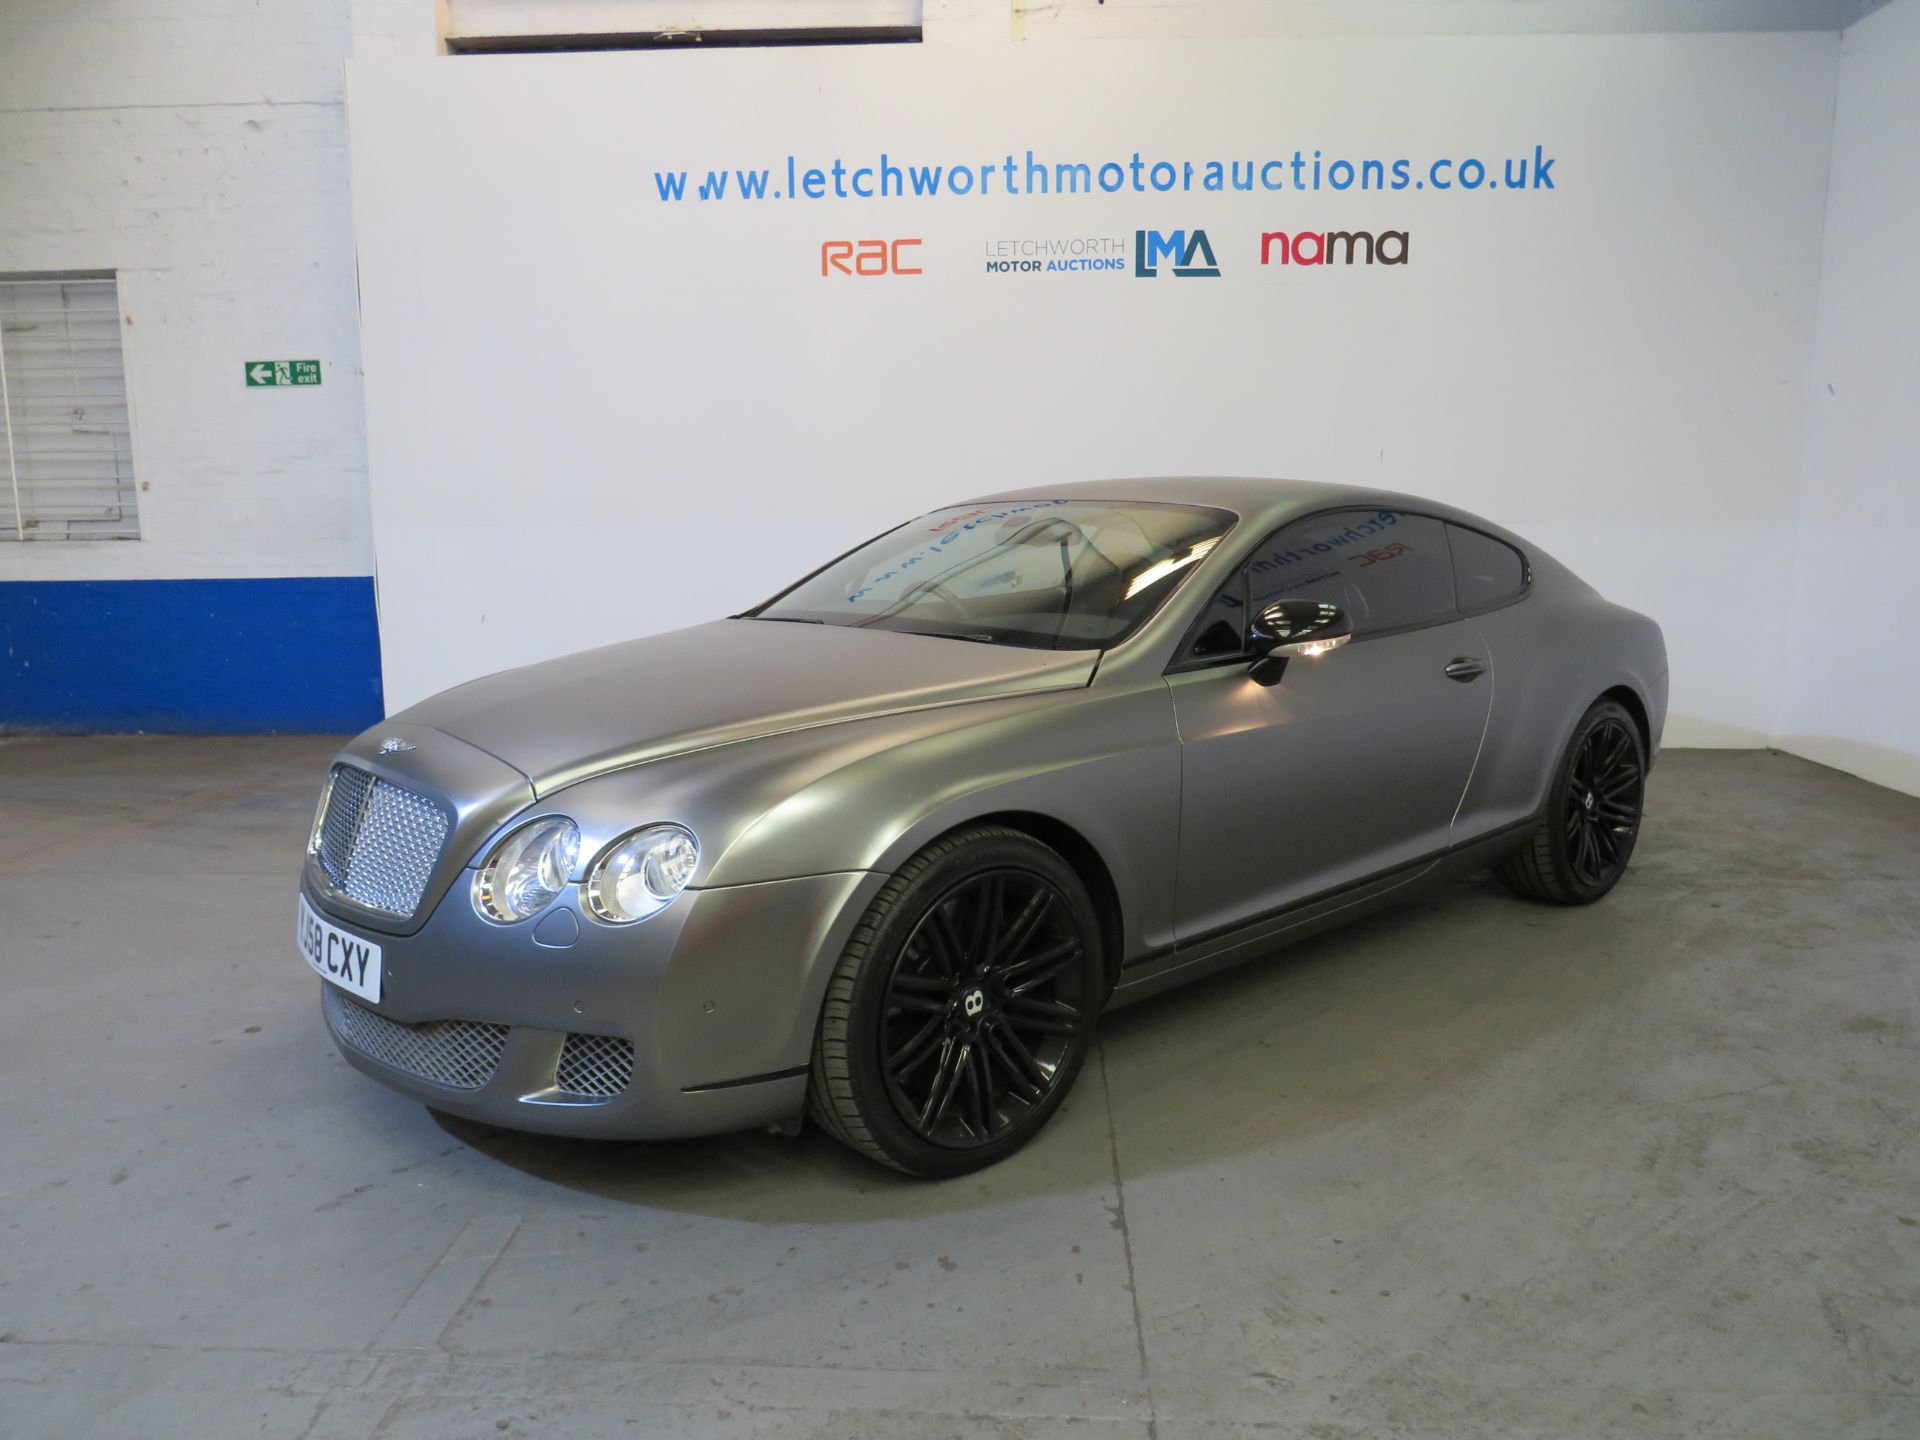 2008 Bentley Continental GT Speed Auto - 5998cc - Image 3 of 11